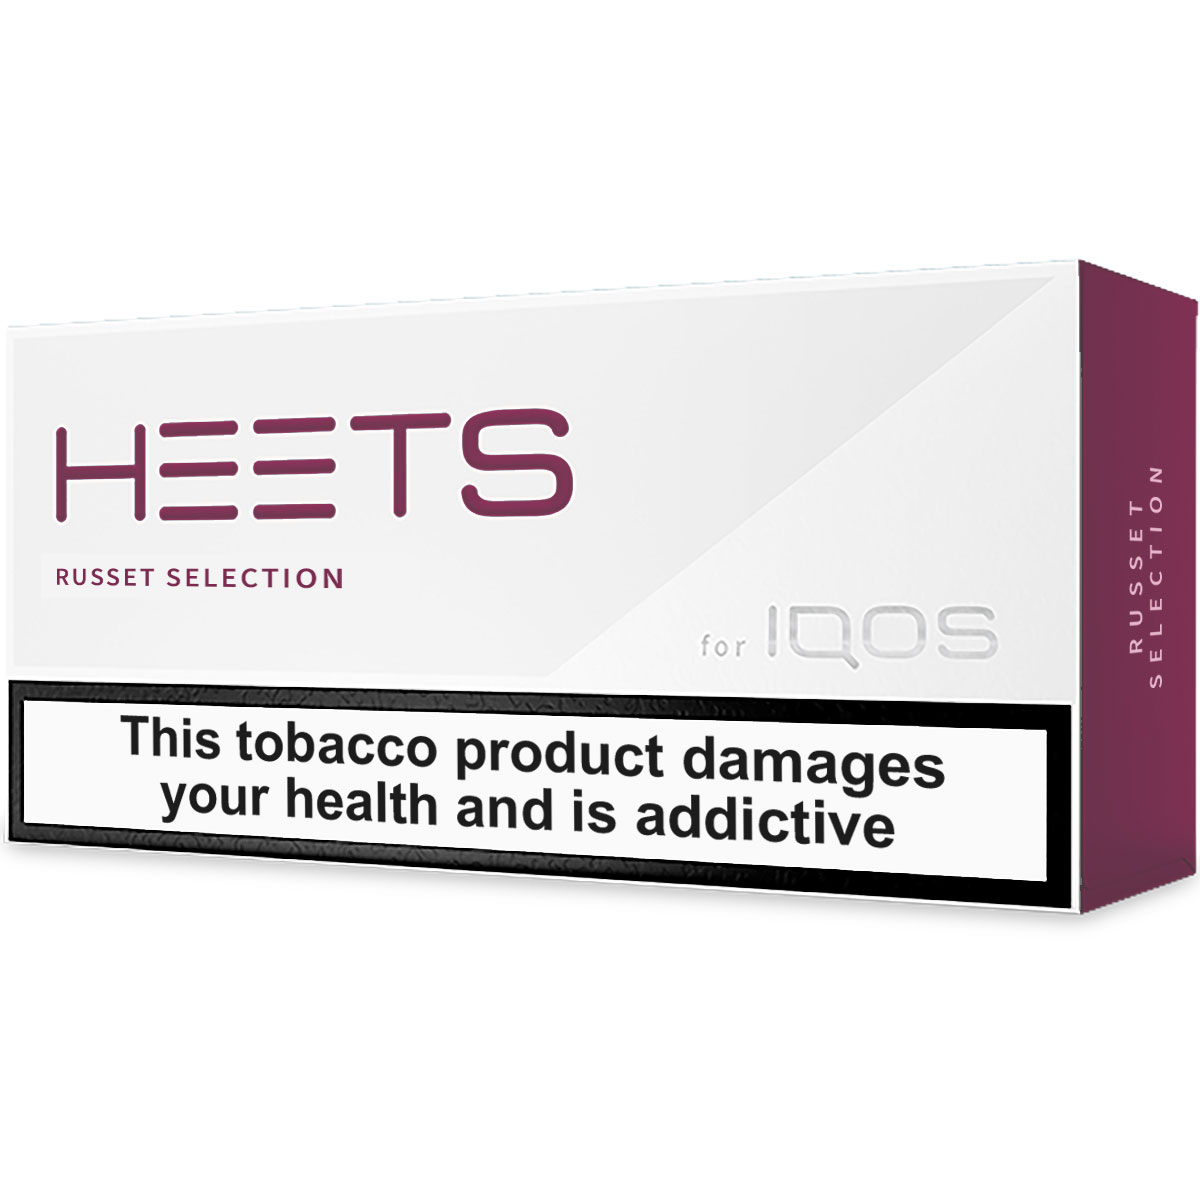 Heets - Russet Selection (from Marlboro)